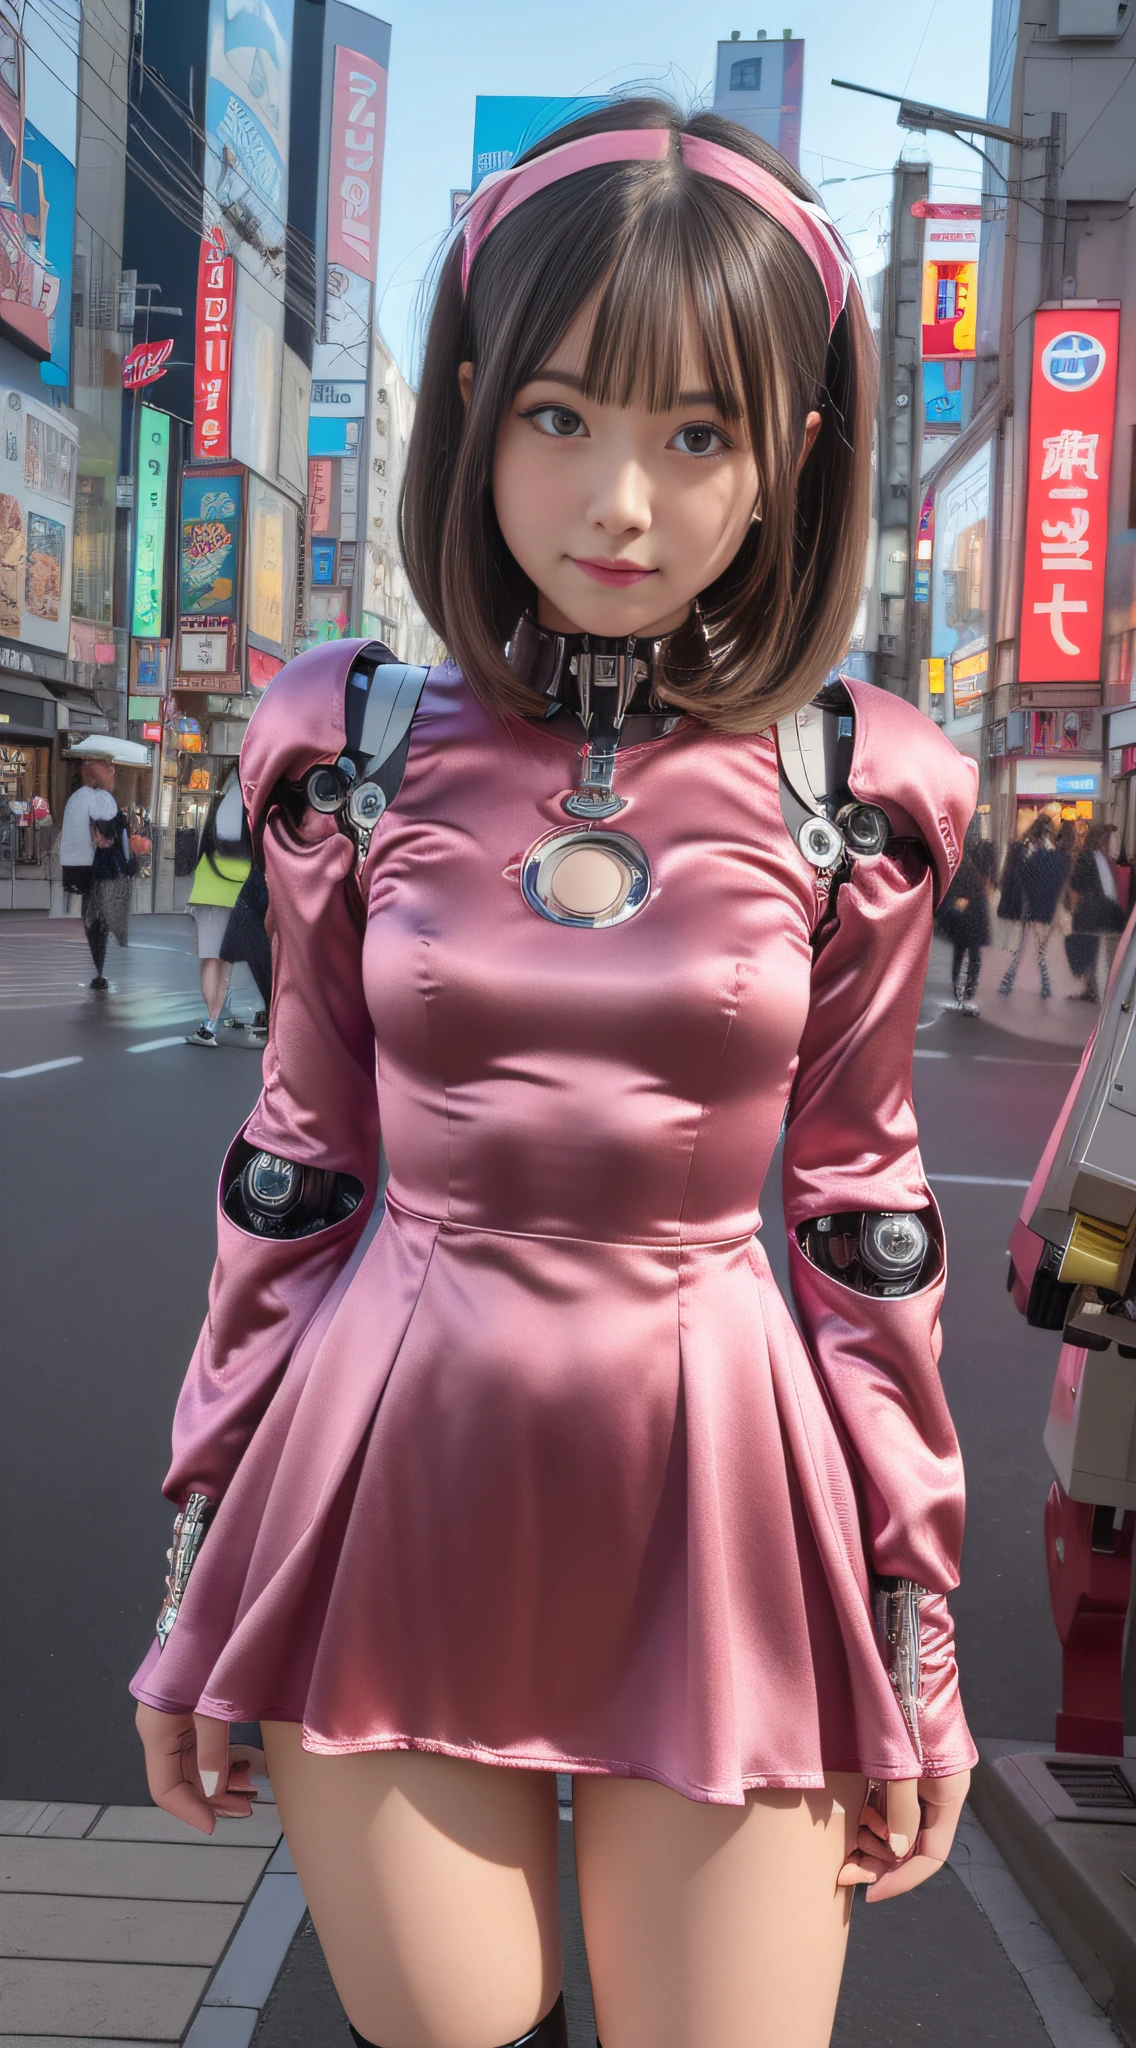 (Photorealsitic:1.4)、Onegirl、(top-quality),(hyperdetailed face)、(Super well-formed face)、((Robot Parts))、(Cyborg girl)、(Burgundy)、(metalic)、(fullllbody)、(Moe Pose)、(Slender body)、(tits out)、(Model body type)、(mecha exposure)、(akihabara)、(is looking at the camera)、(A dark-haired)、(９Head and body)、(a small face)、(Idol)、(front facing)、(is standing)、(Photo session)、(Looks sad)、(Cyborg girl in pink satin dress)、(sleeve less)、(a miniskirt)